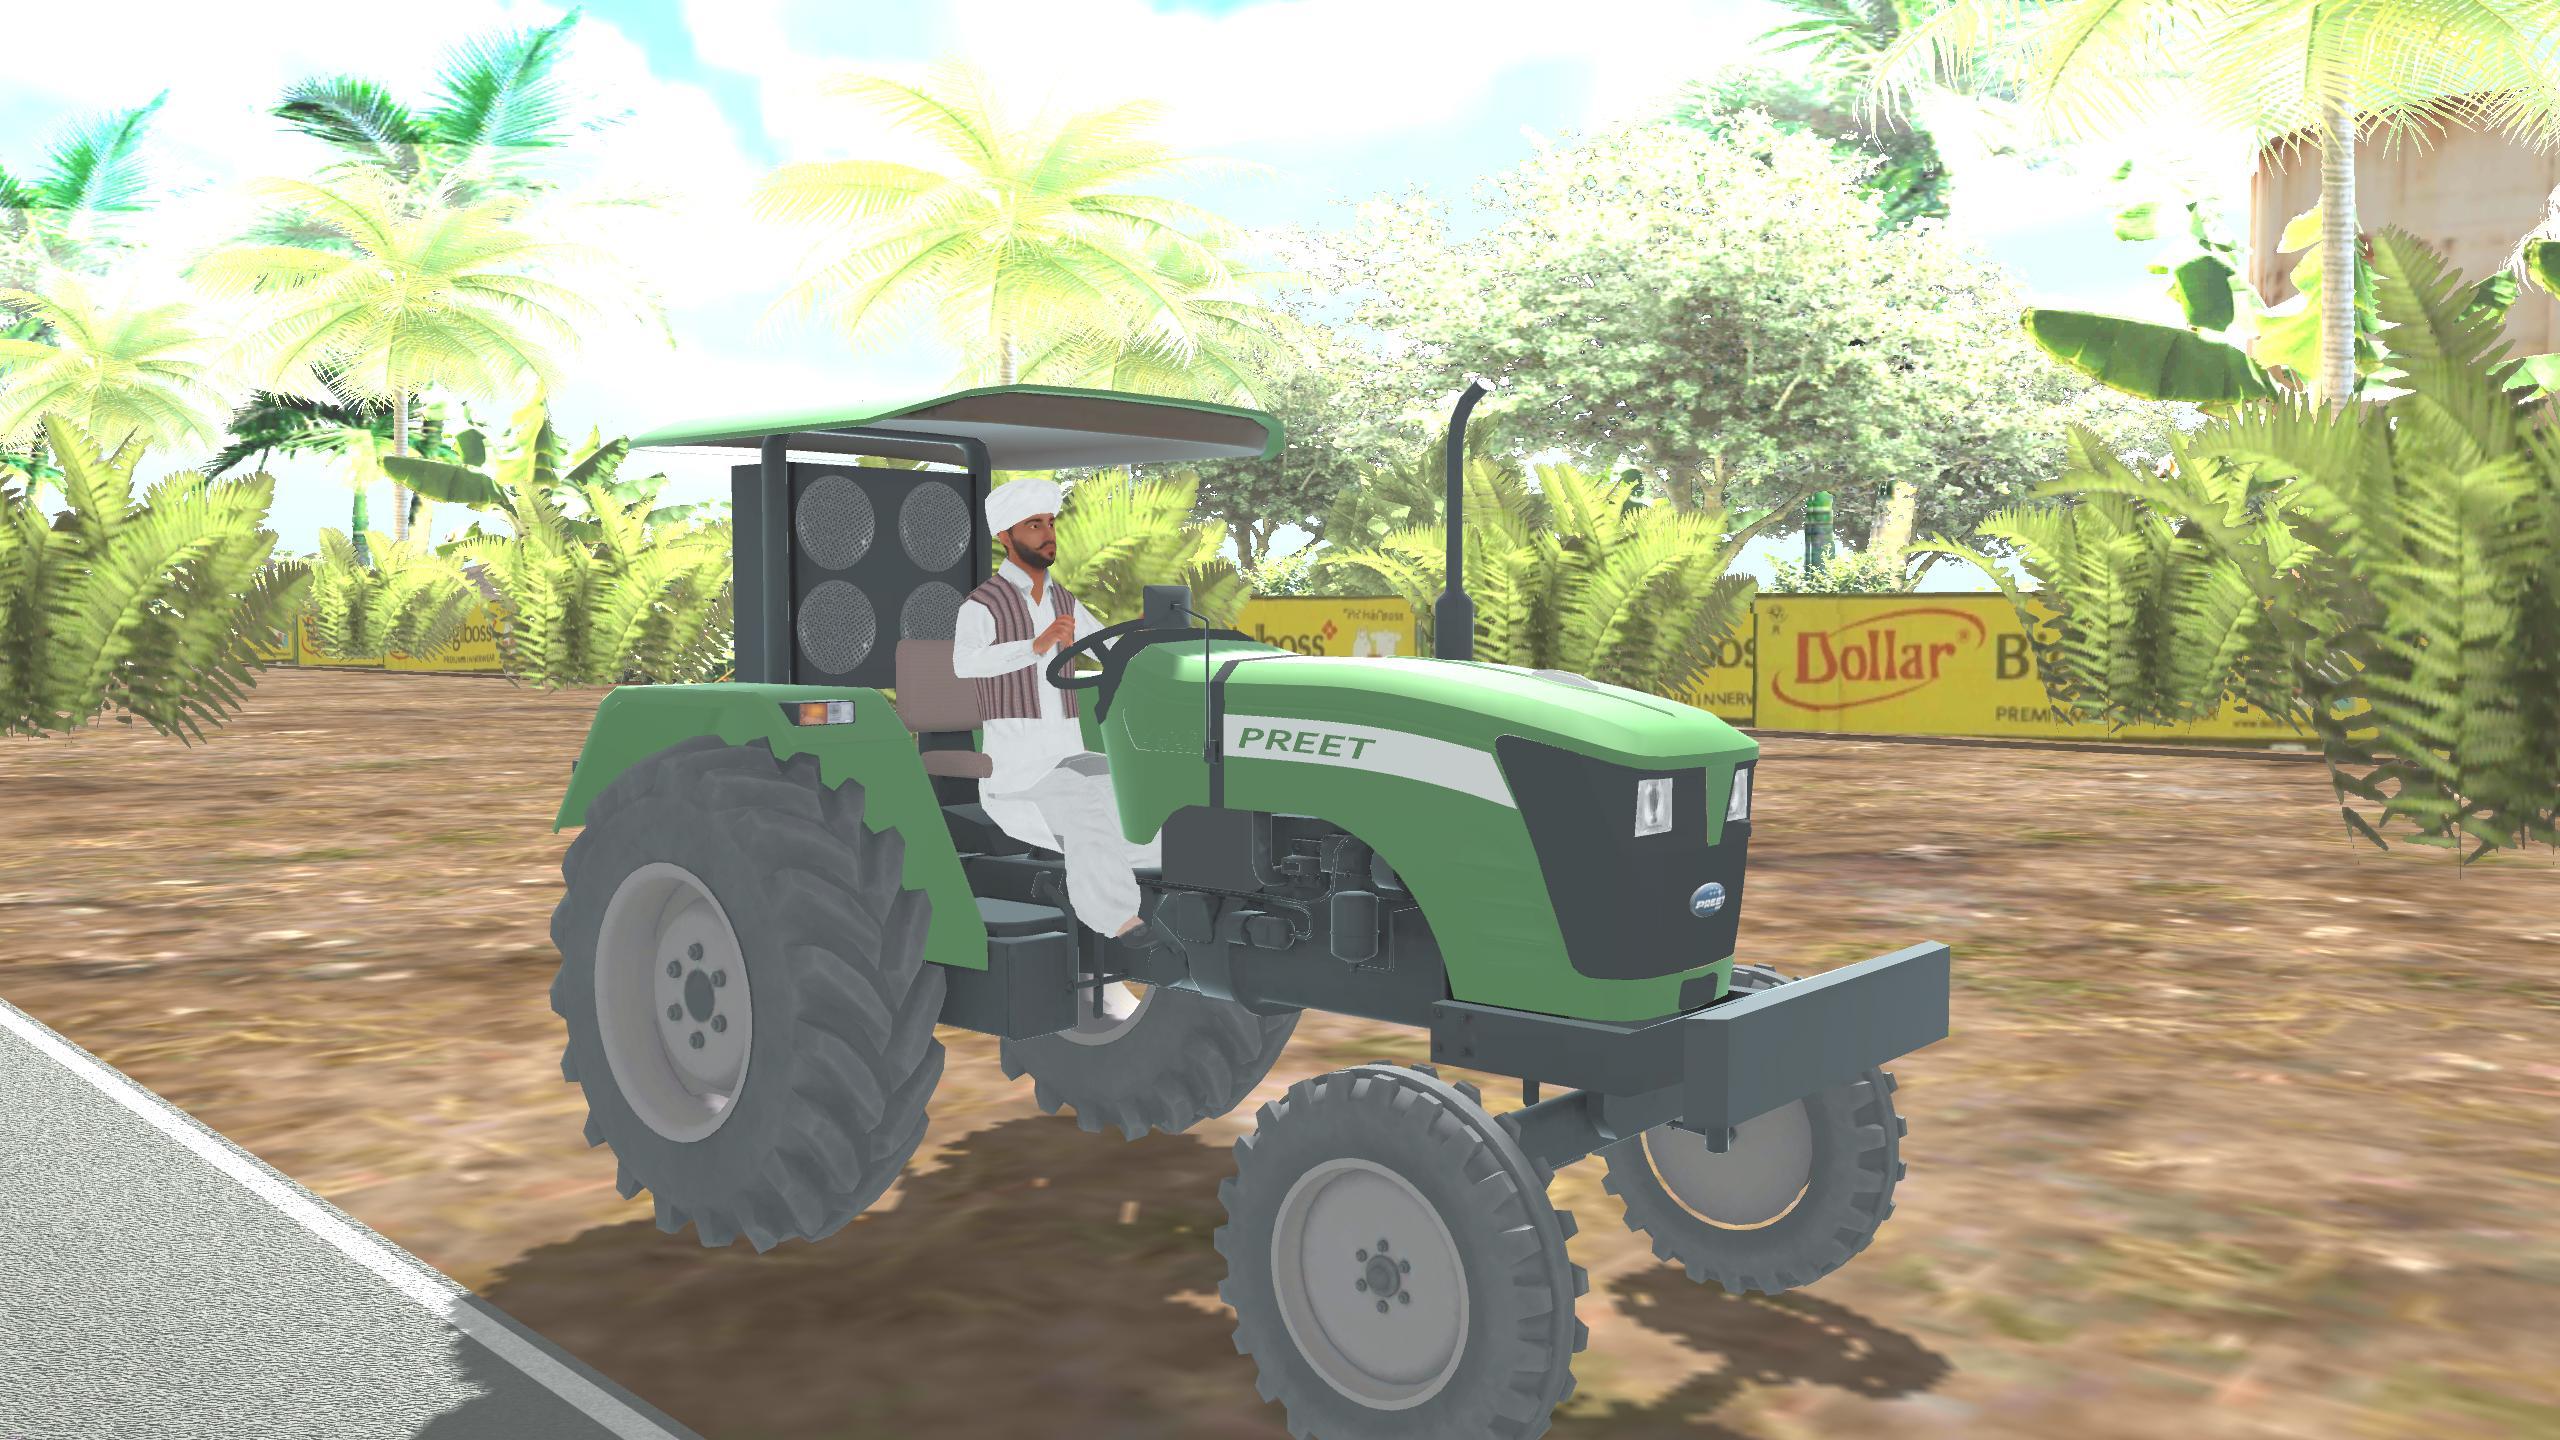 Indian Tractor PRO Simulation